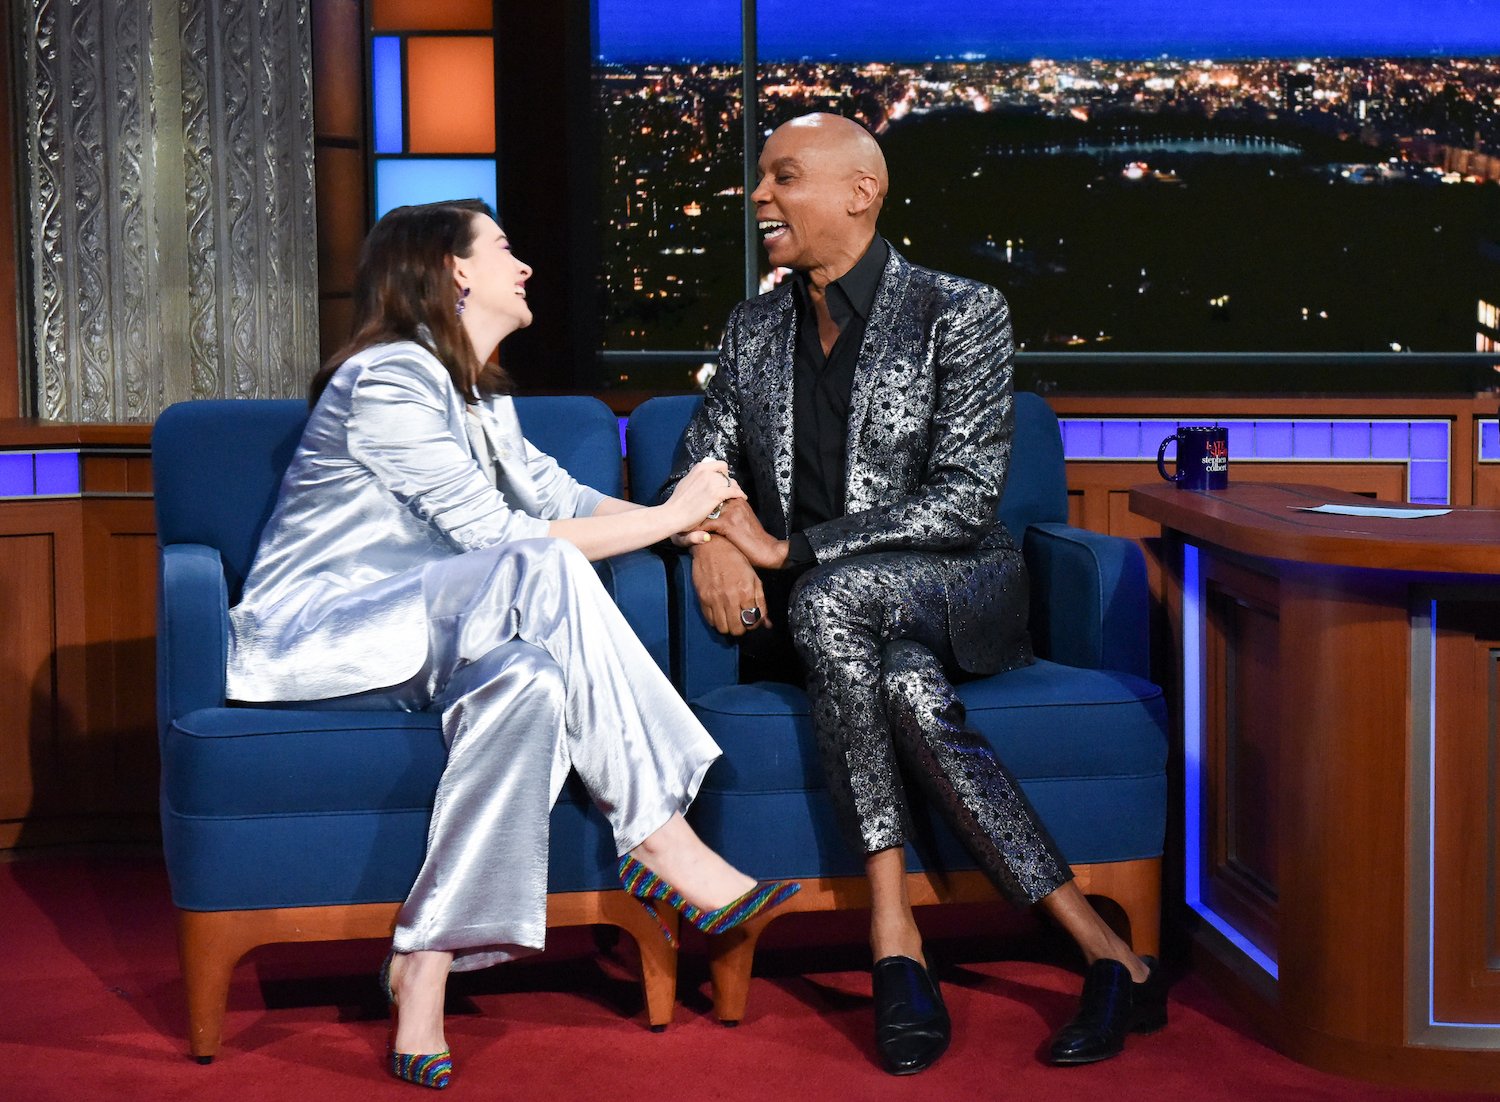 'The Late Show with Stephen Colbert' guests Anne Hathaway and RuPaul Charles